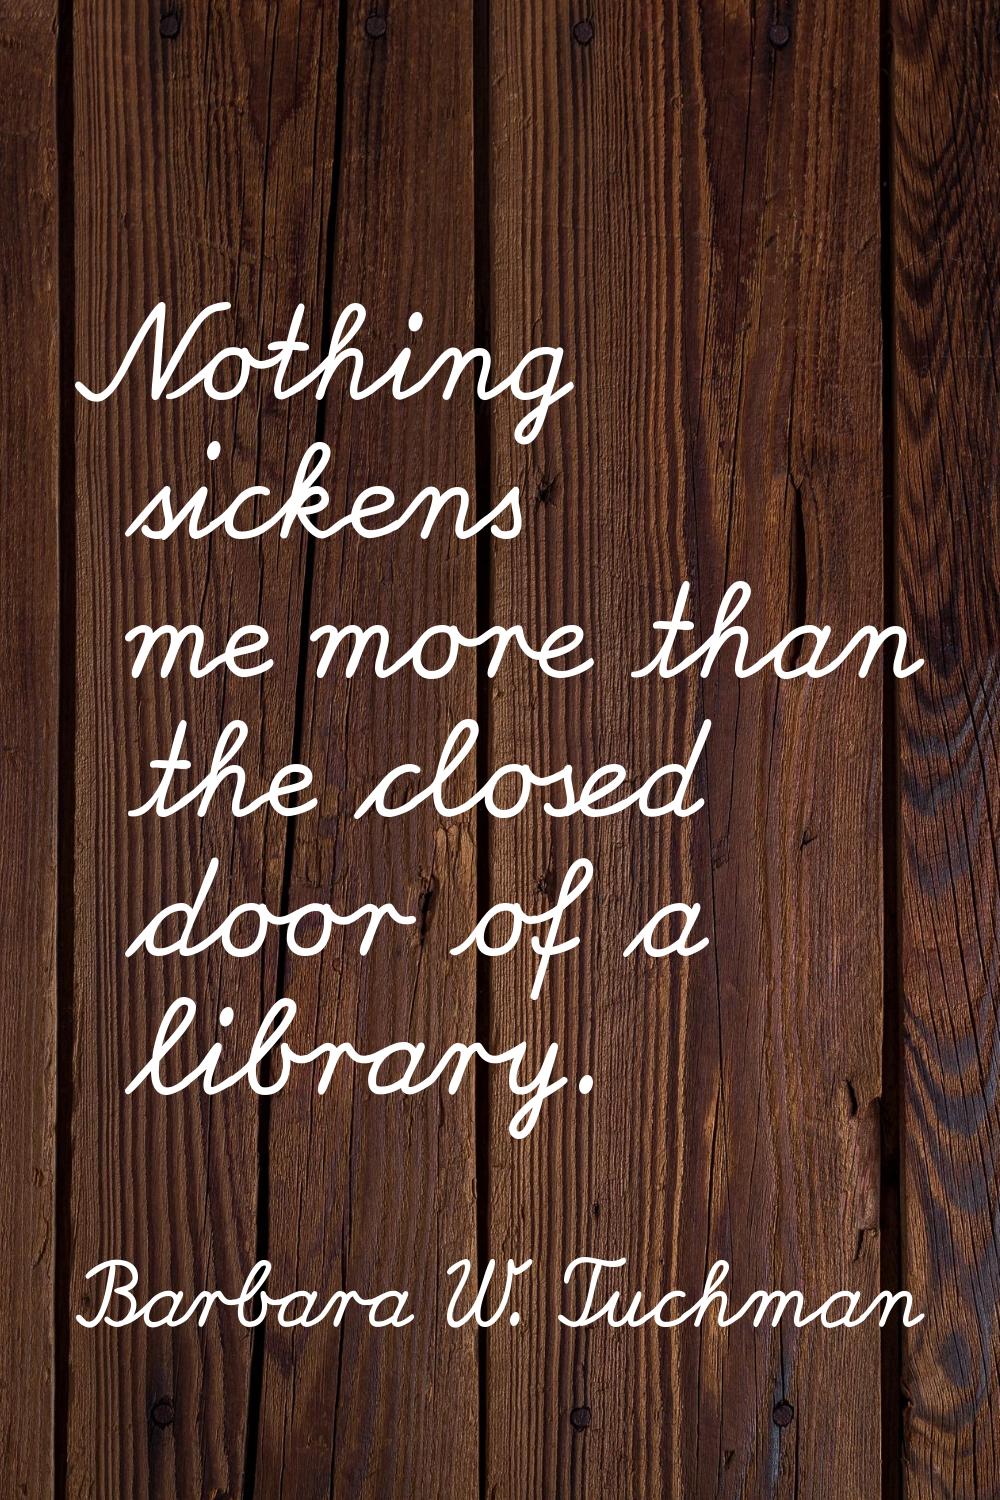 Nothing sickens me more than the closed door of a library.